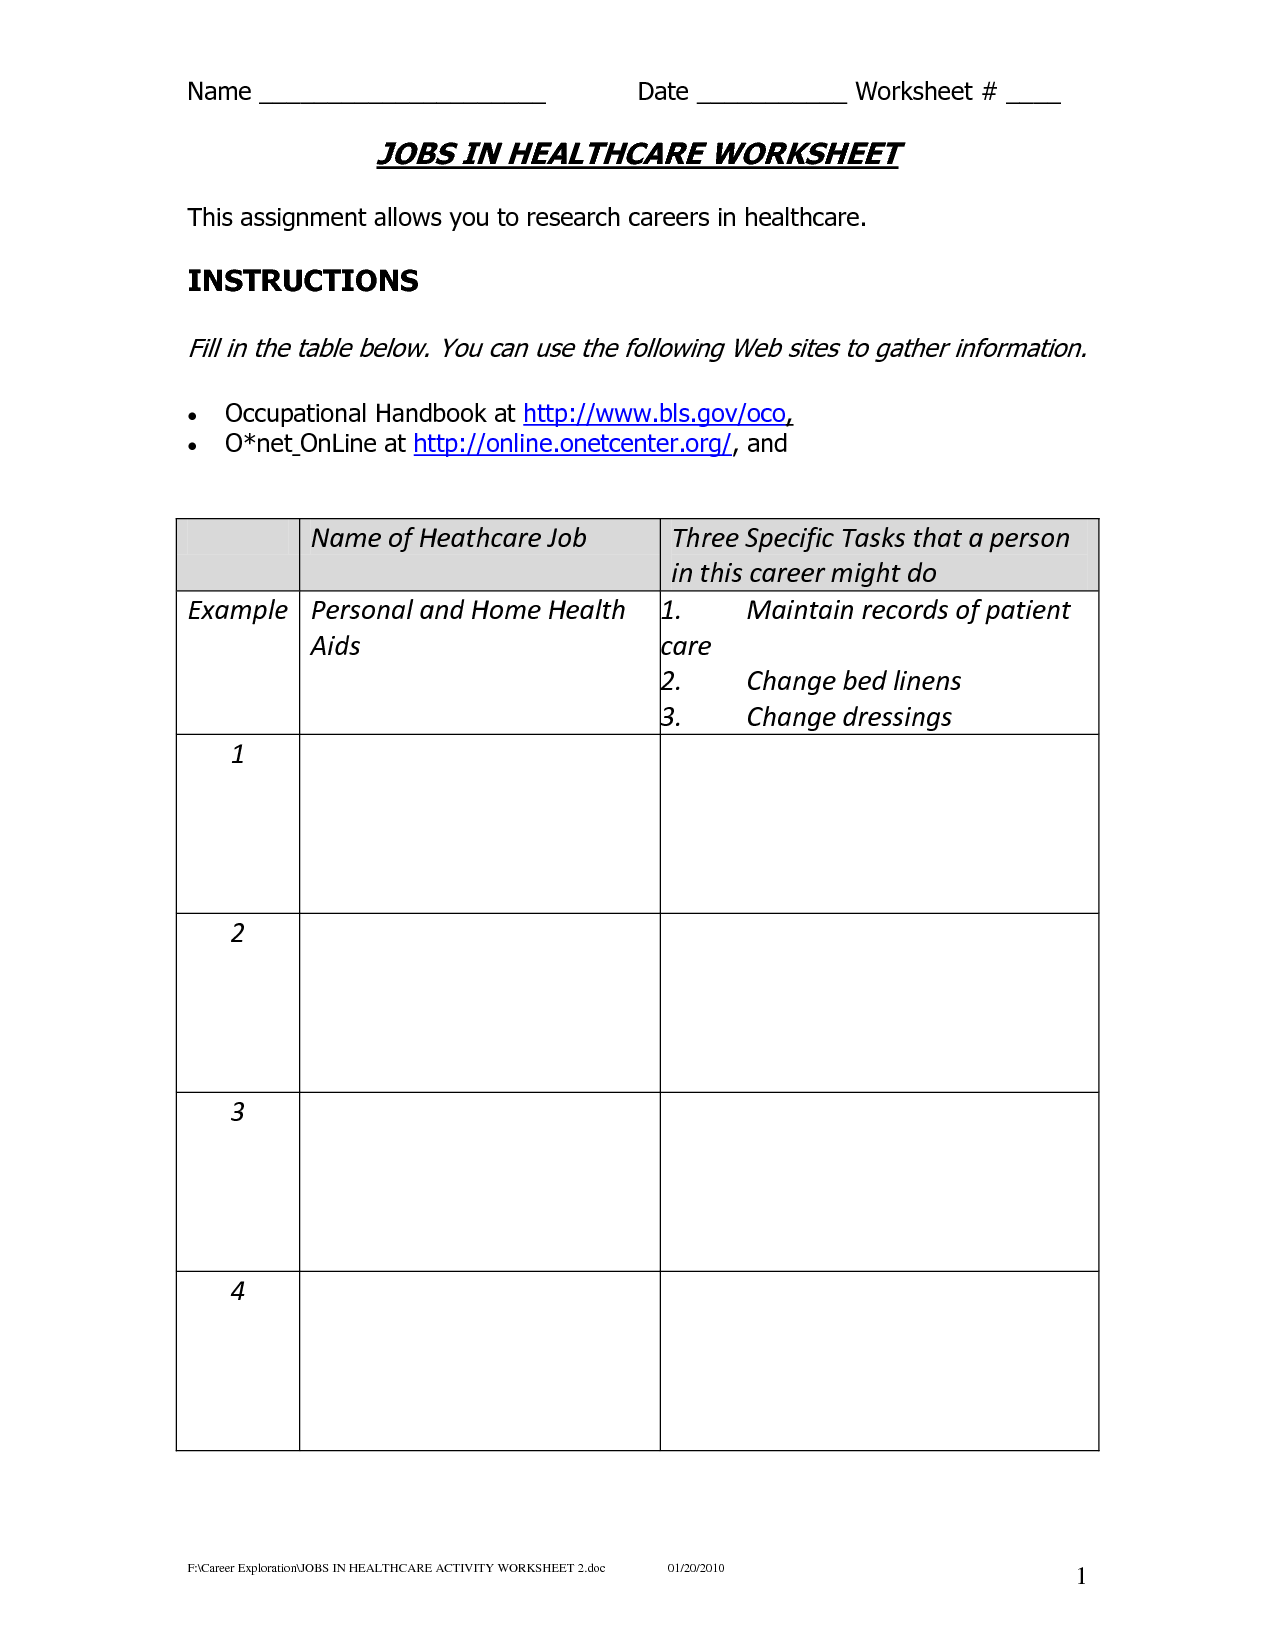 9-best-images-of-career-research-worksheet-career-research-worksheet